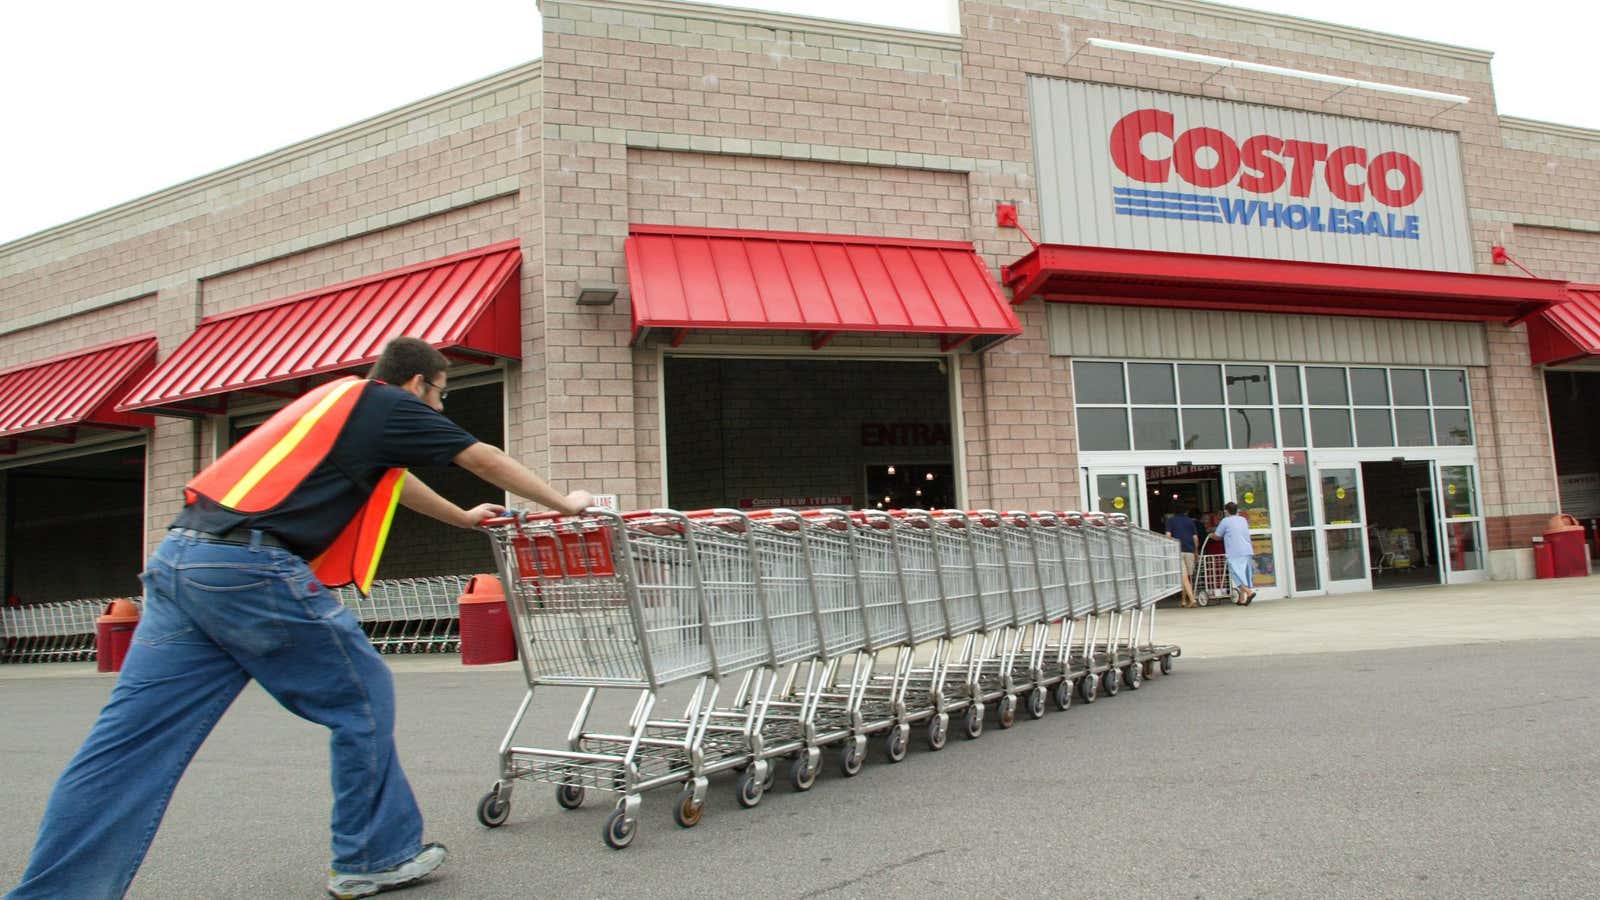 Shareholders at Costco demanded the company cut its carbon footprint in January. More resolutions targeting climate action are poised to pass at other companies this year.